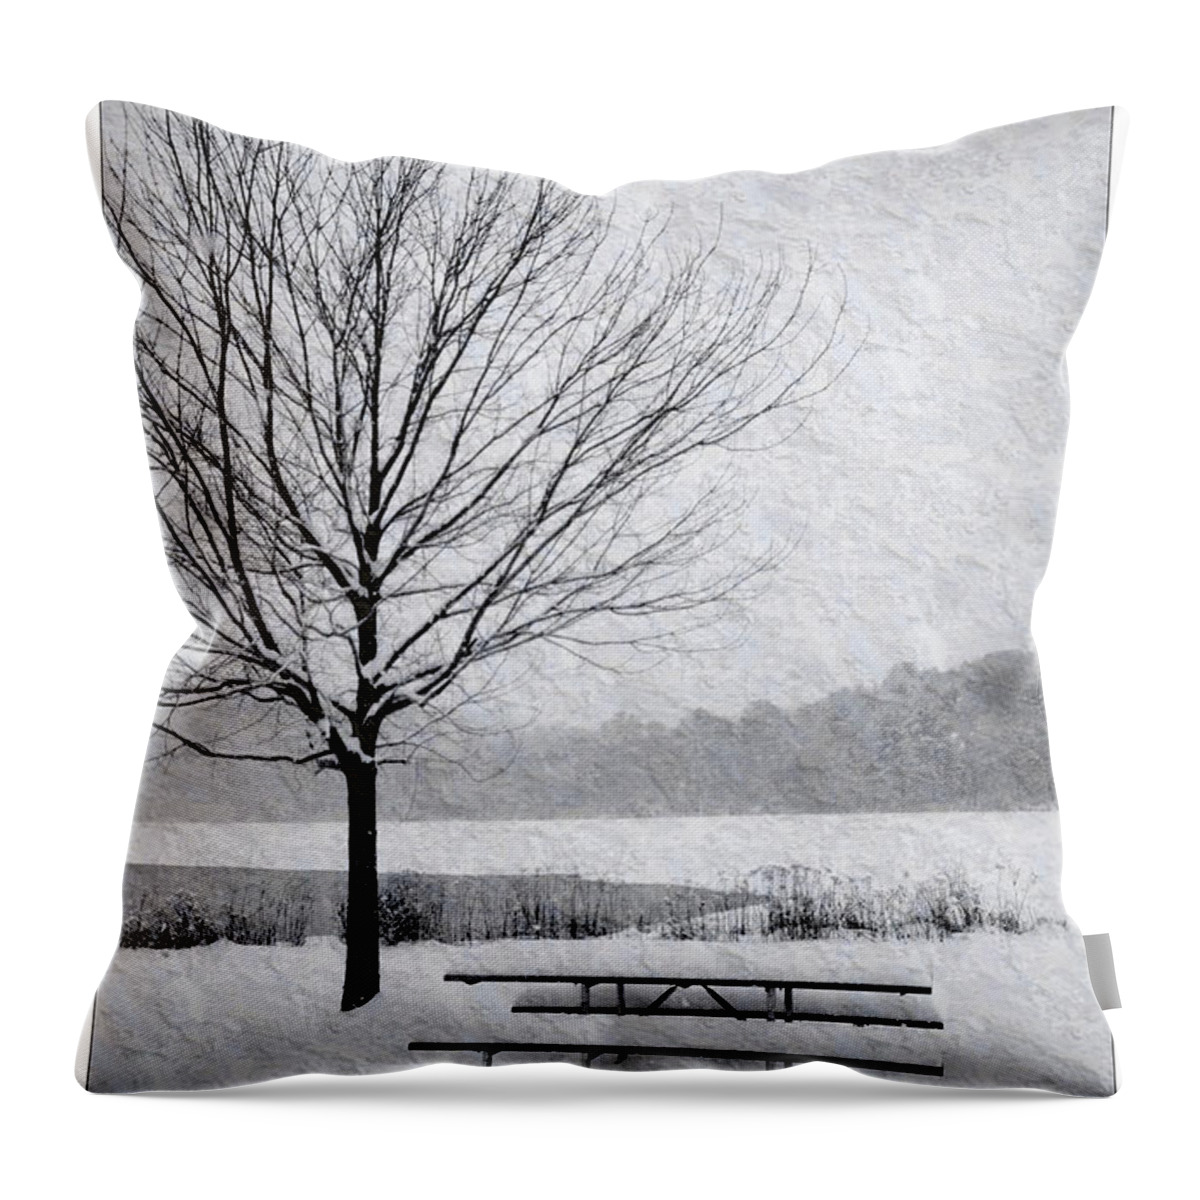 Landscape Throw Pillow featuring the photograph Snow Covered Picnic Table by Crystal Wightman